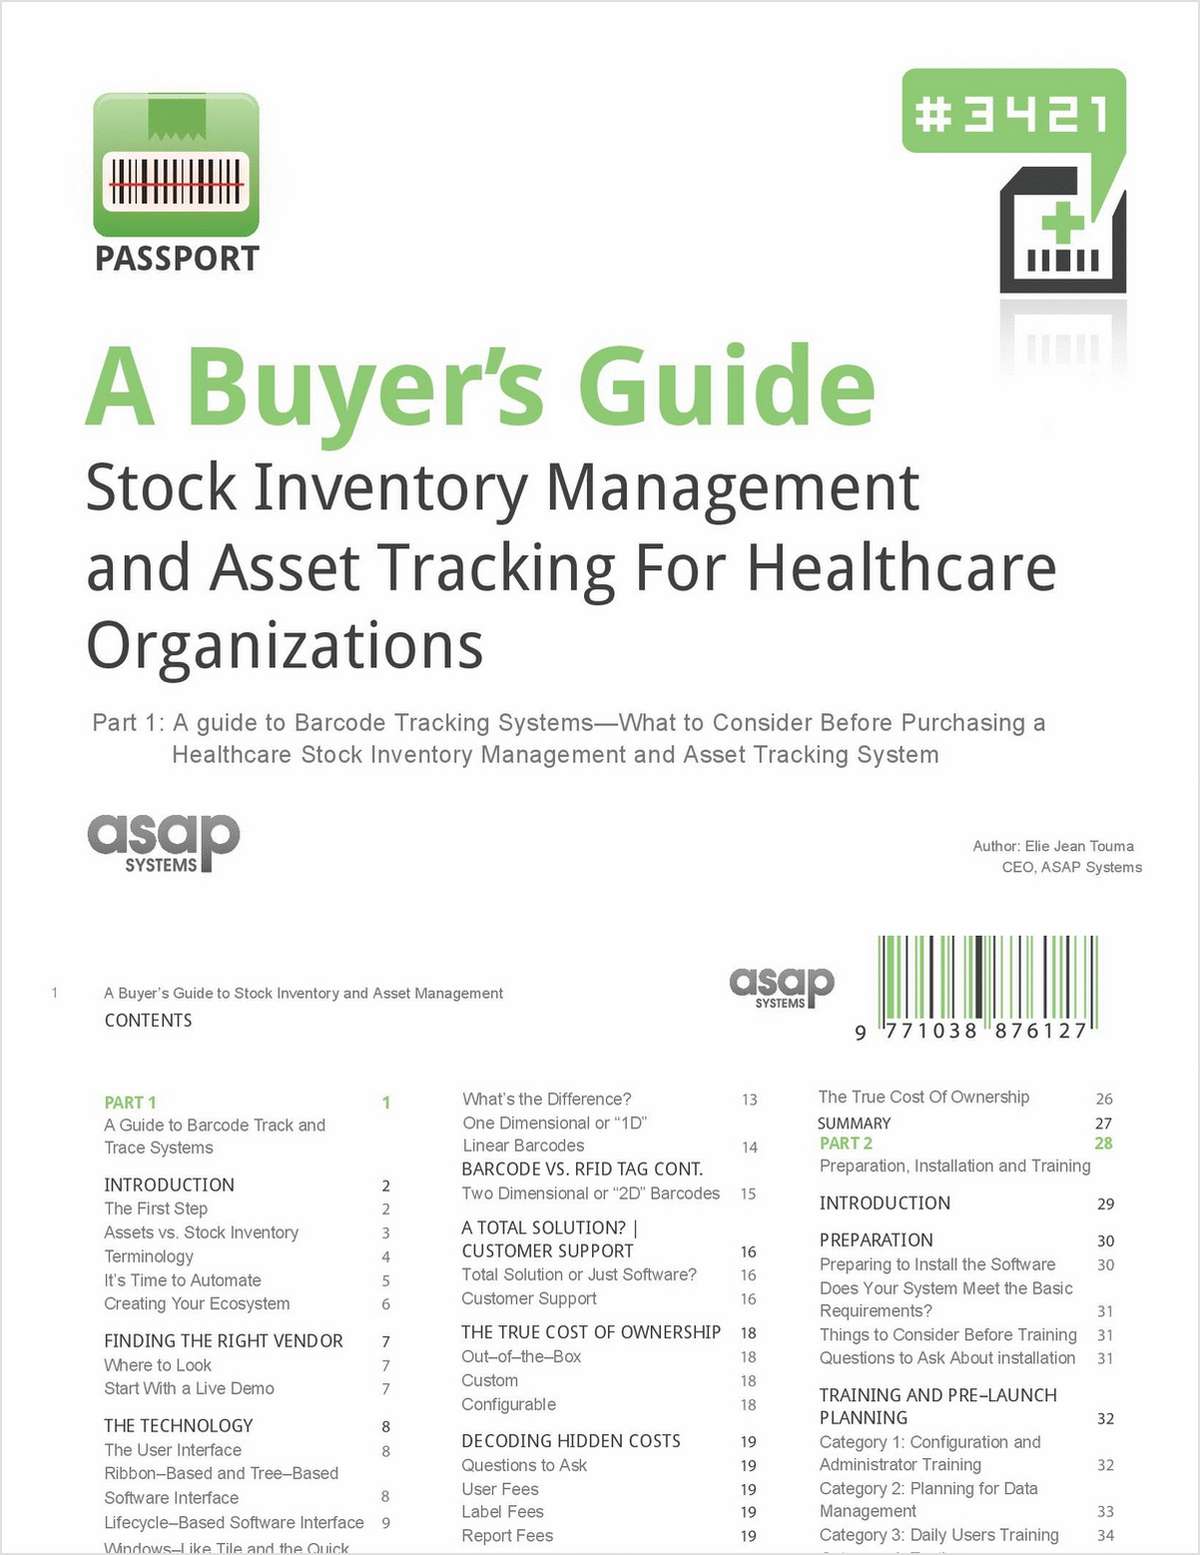 A Buyer's Guide: Stock Inventory Management and Asset Tracking for Healthcare Organizations